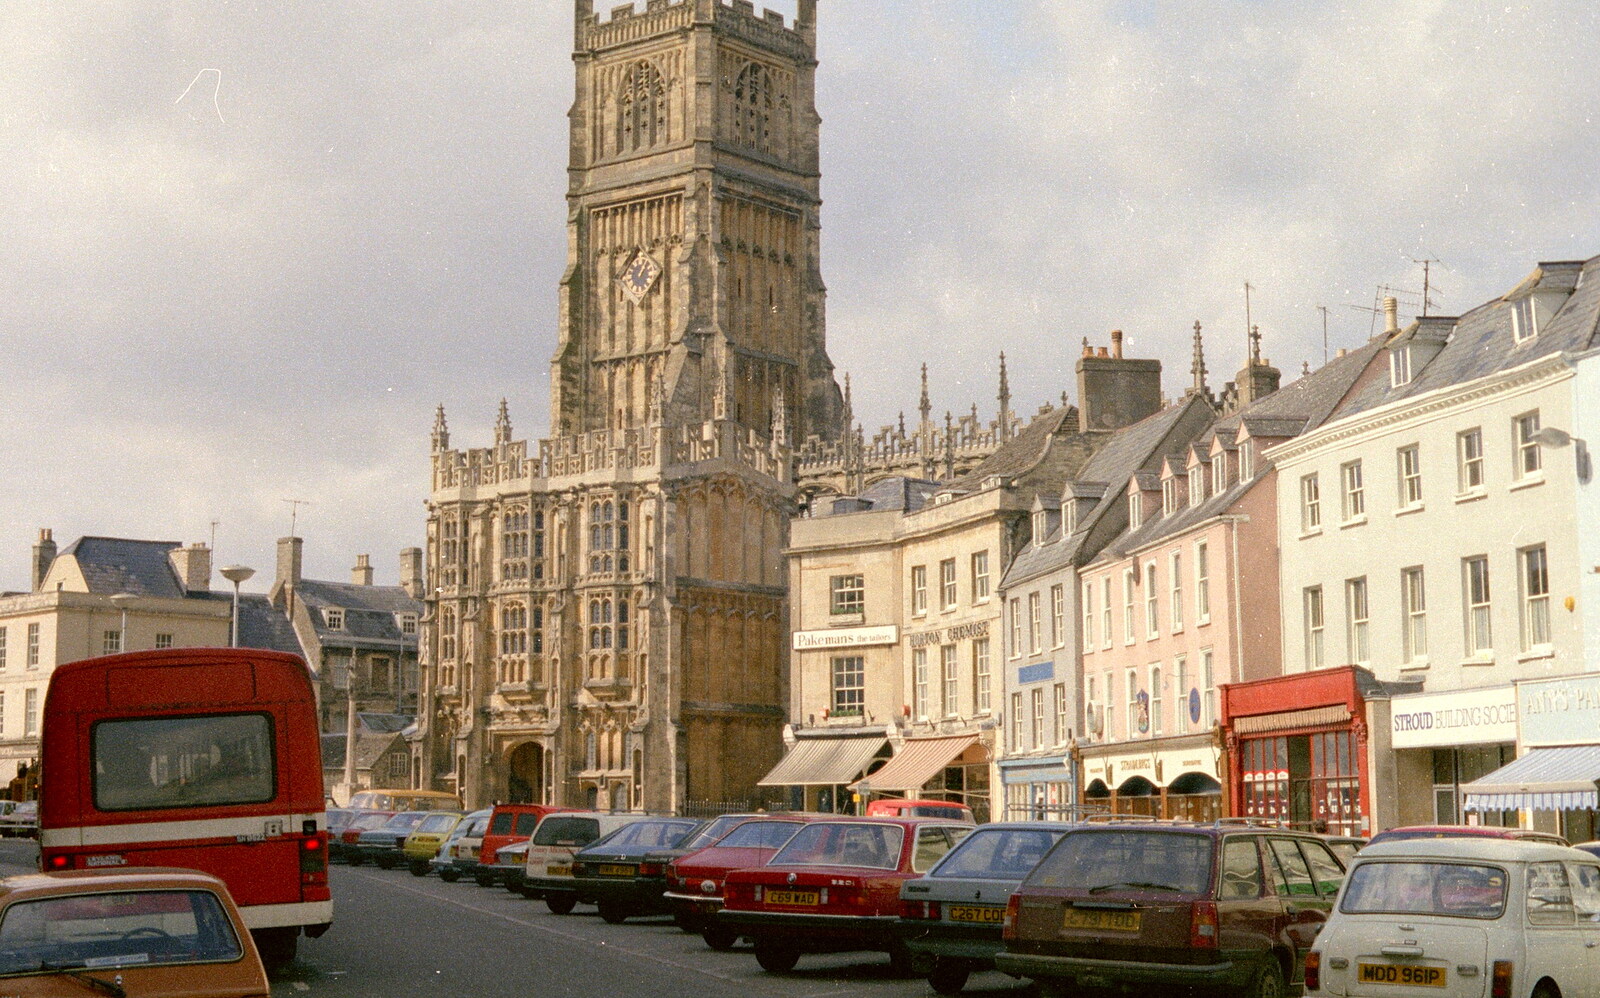 Cirencester town centre, on the way to Macclesfield from Easter With Sean in Macclesfield, Cheshire - 6th April 1986